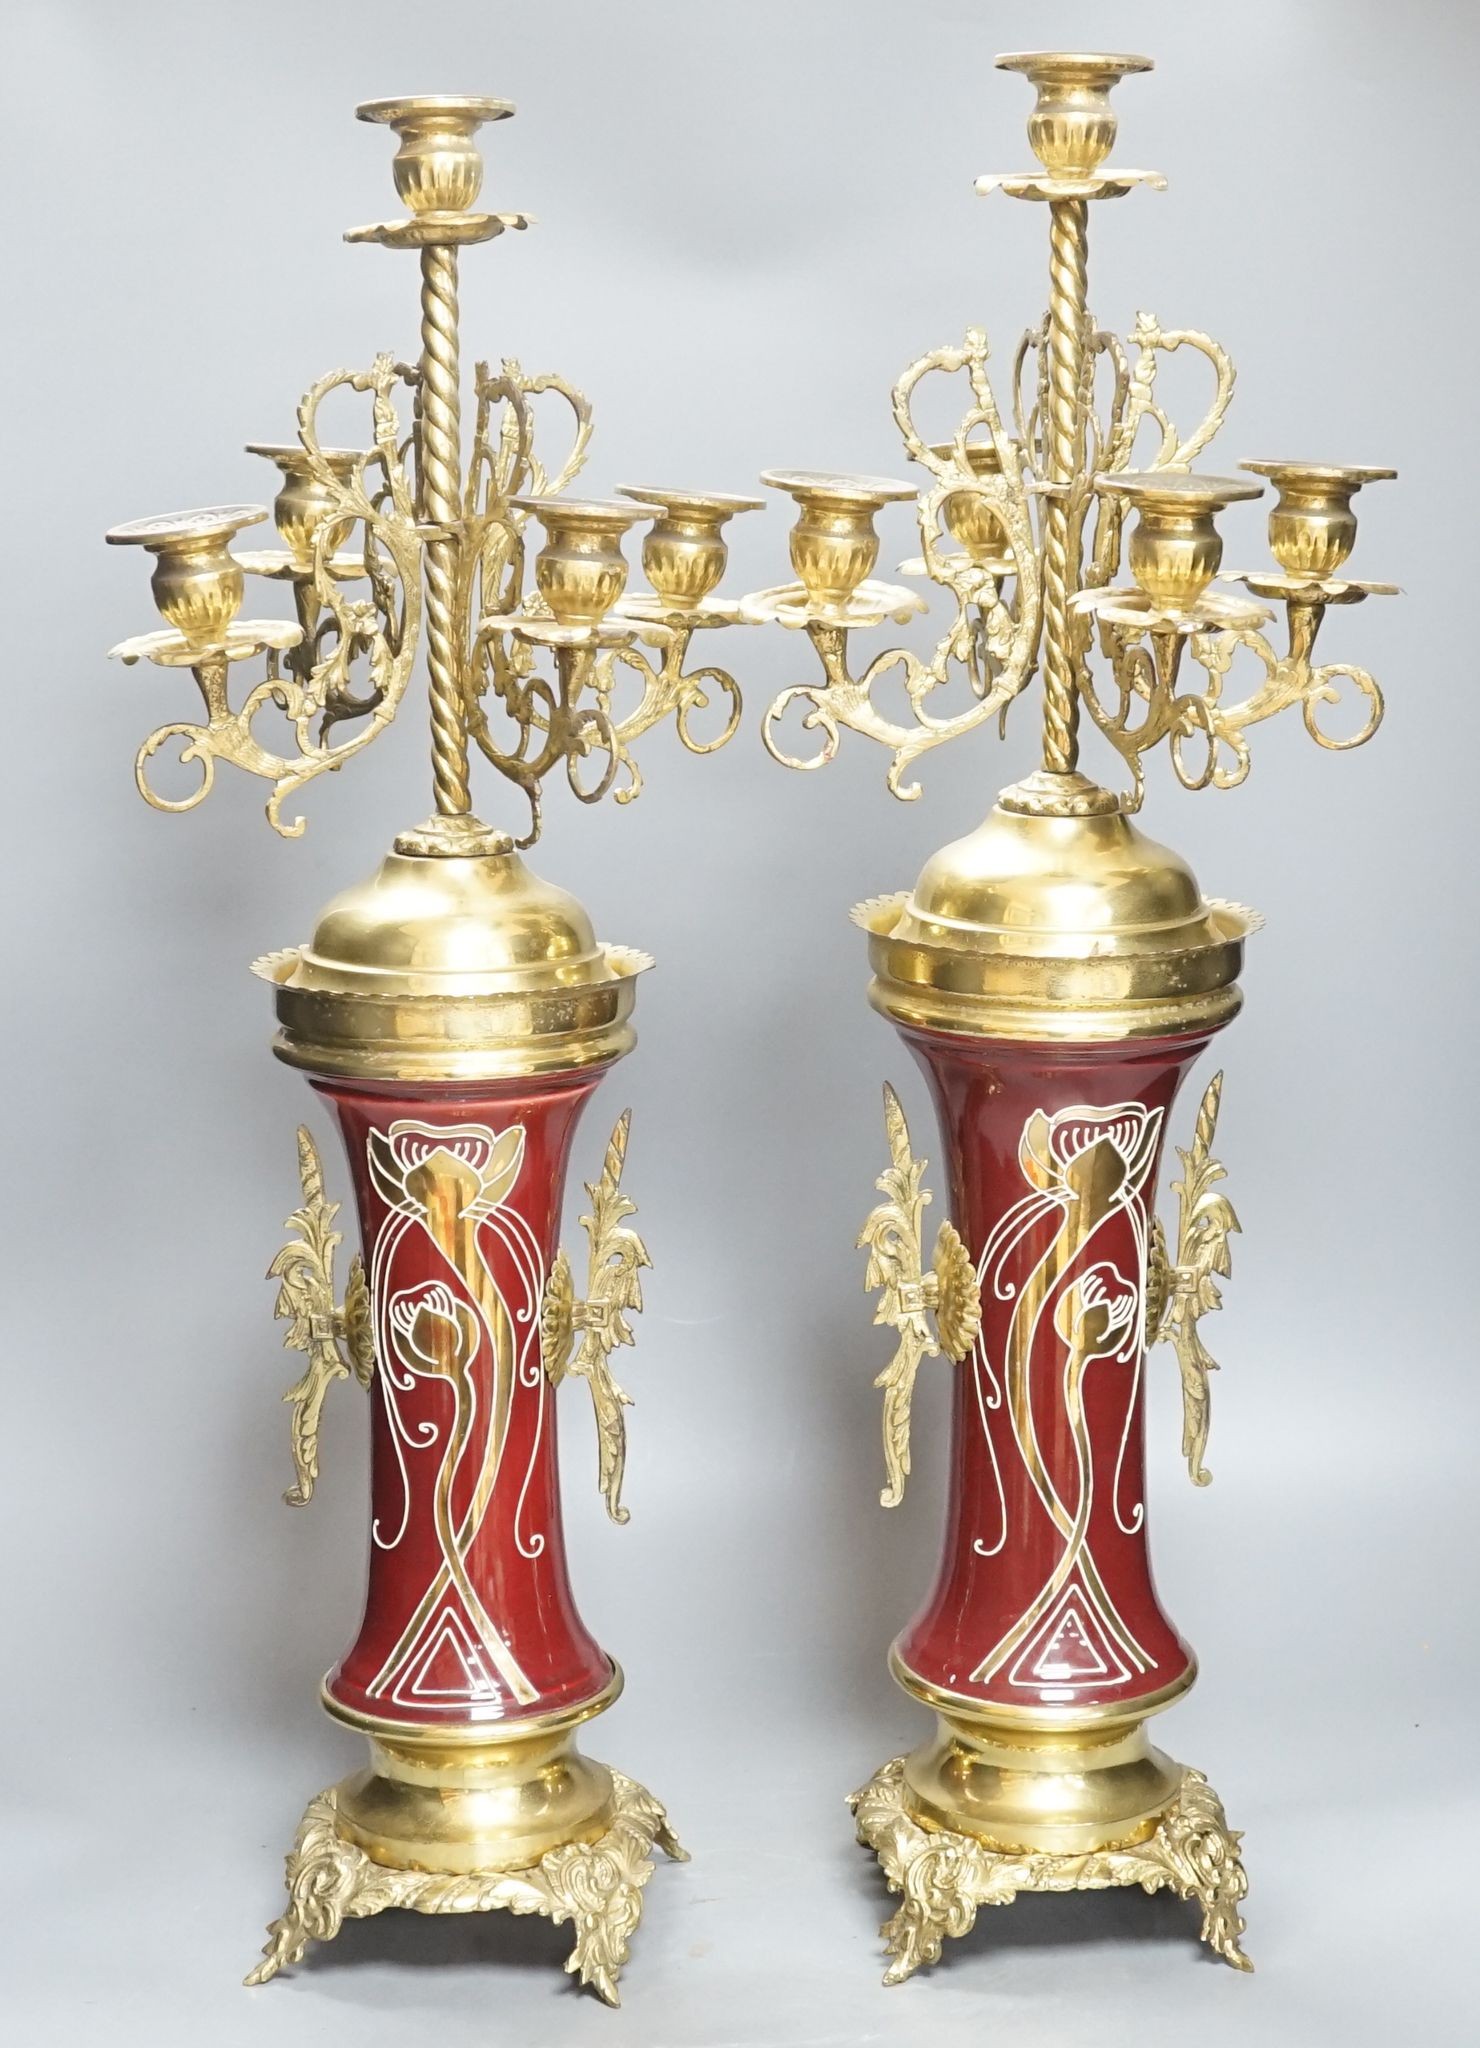 A pair of large brass and ceramic mounted candelabra, 64.5 cms high.